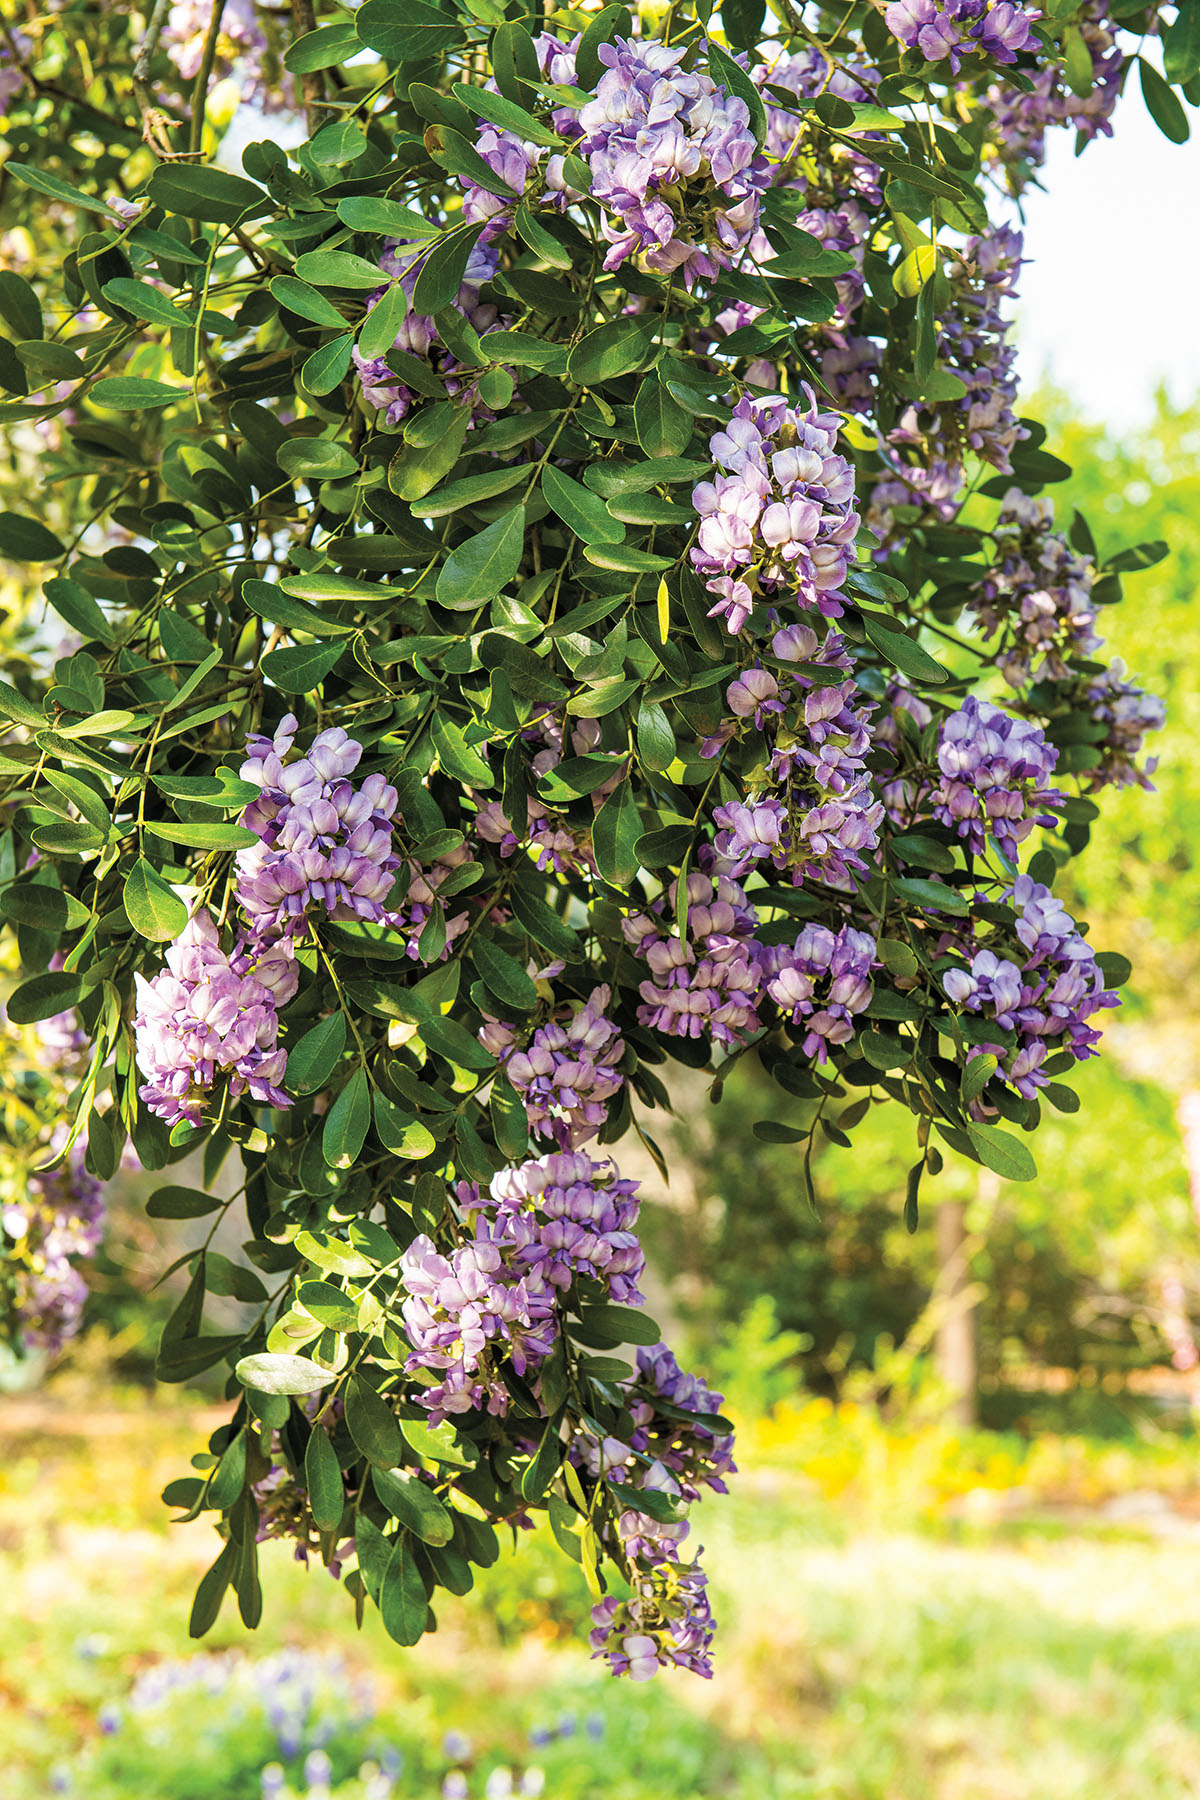 A green tree with bright purple flowers in front of a bright green background